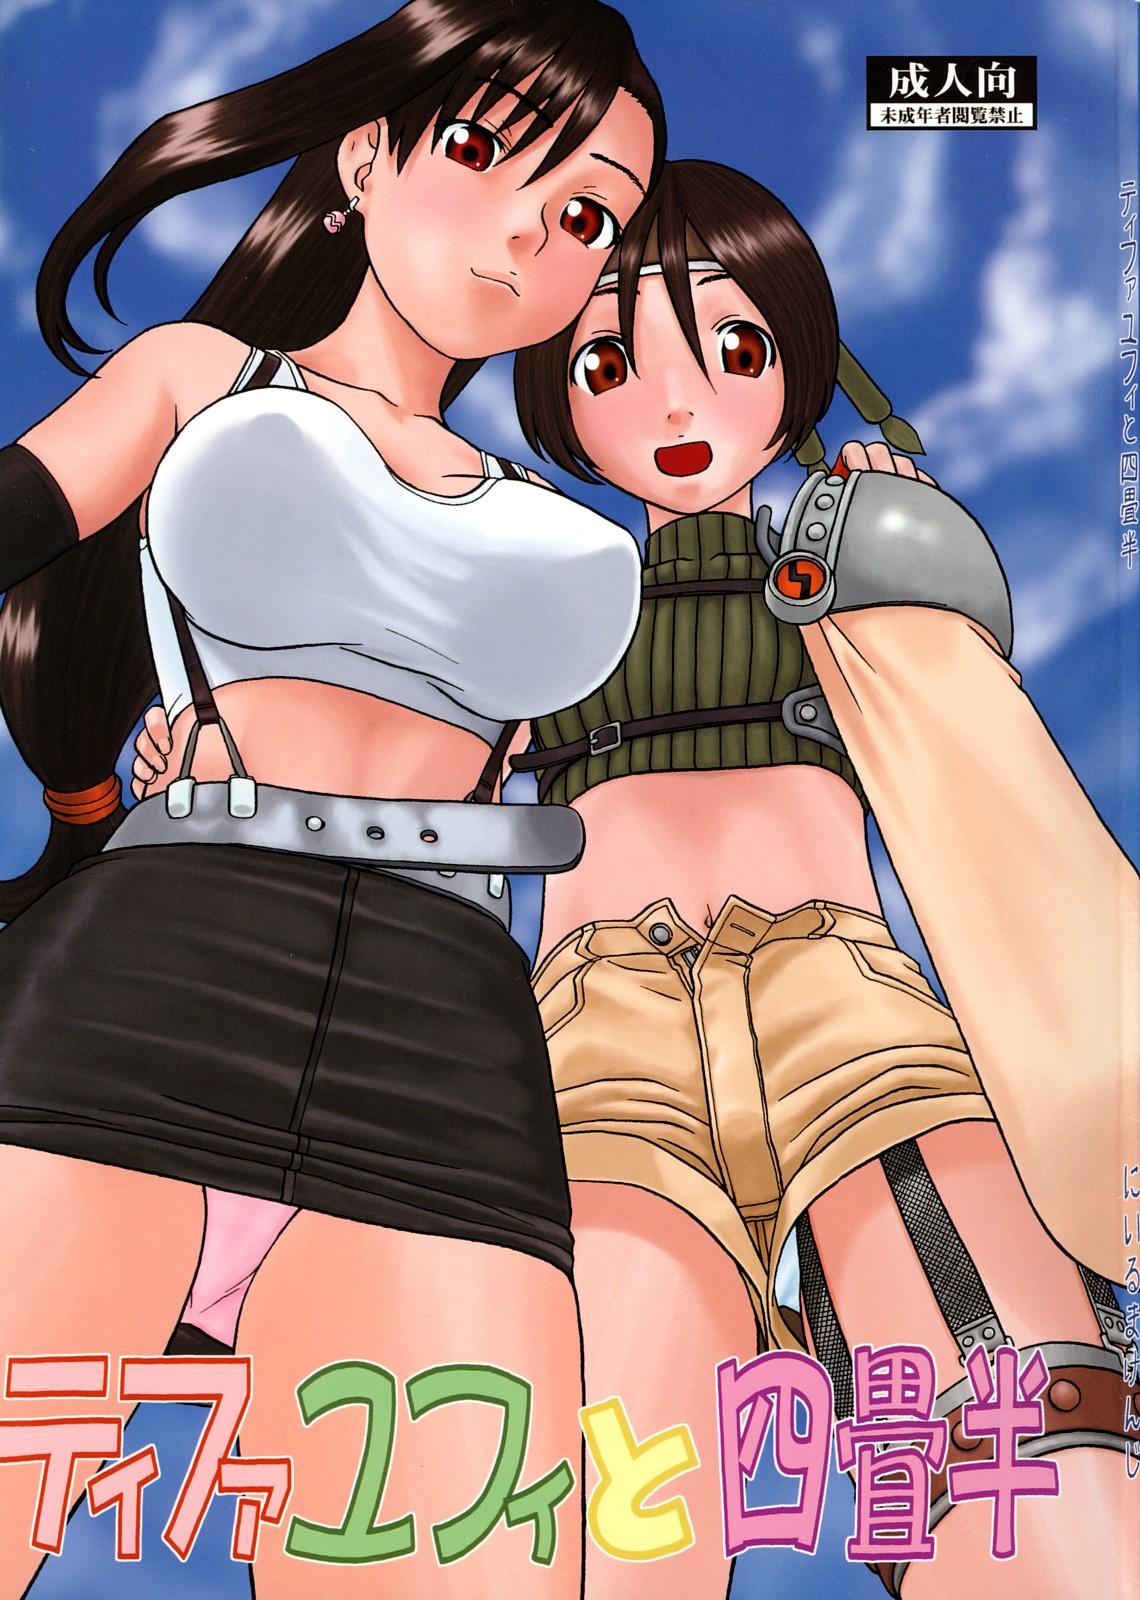 Step Sister Tifa to Yuffie to Yojouhan - Final fantasy vii Gay Brokenboys - Picture 1